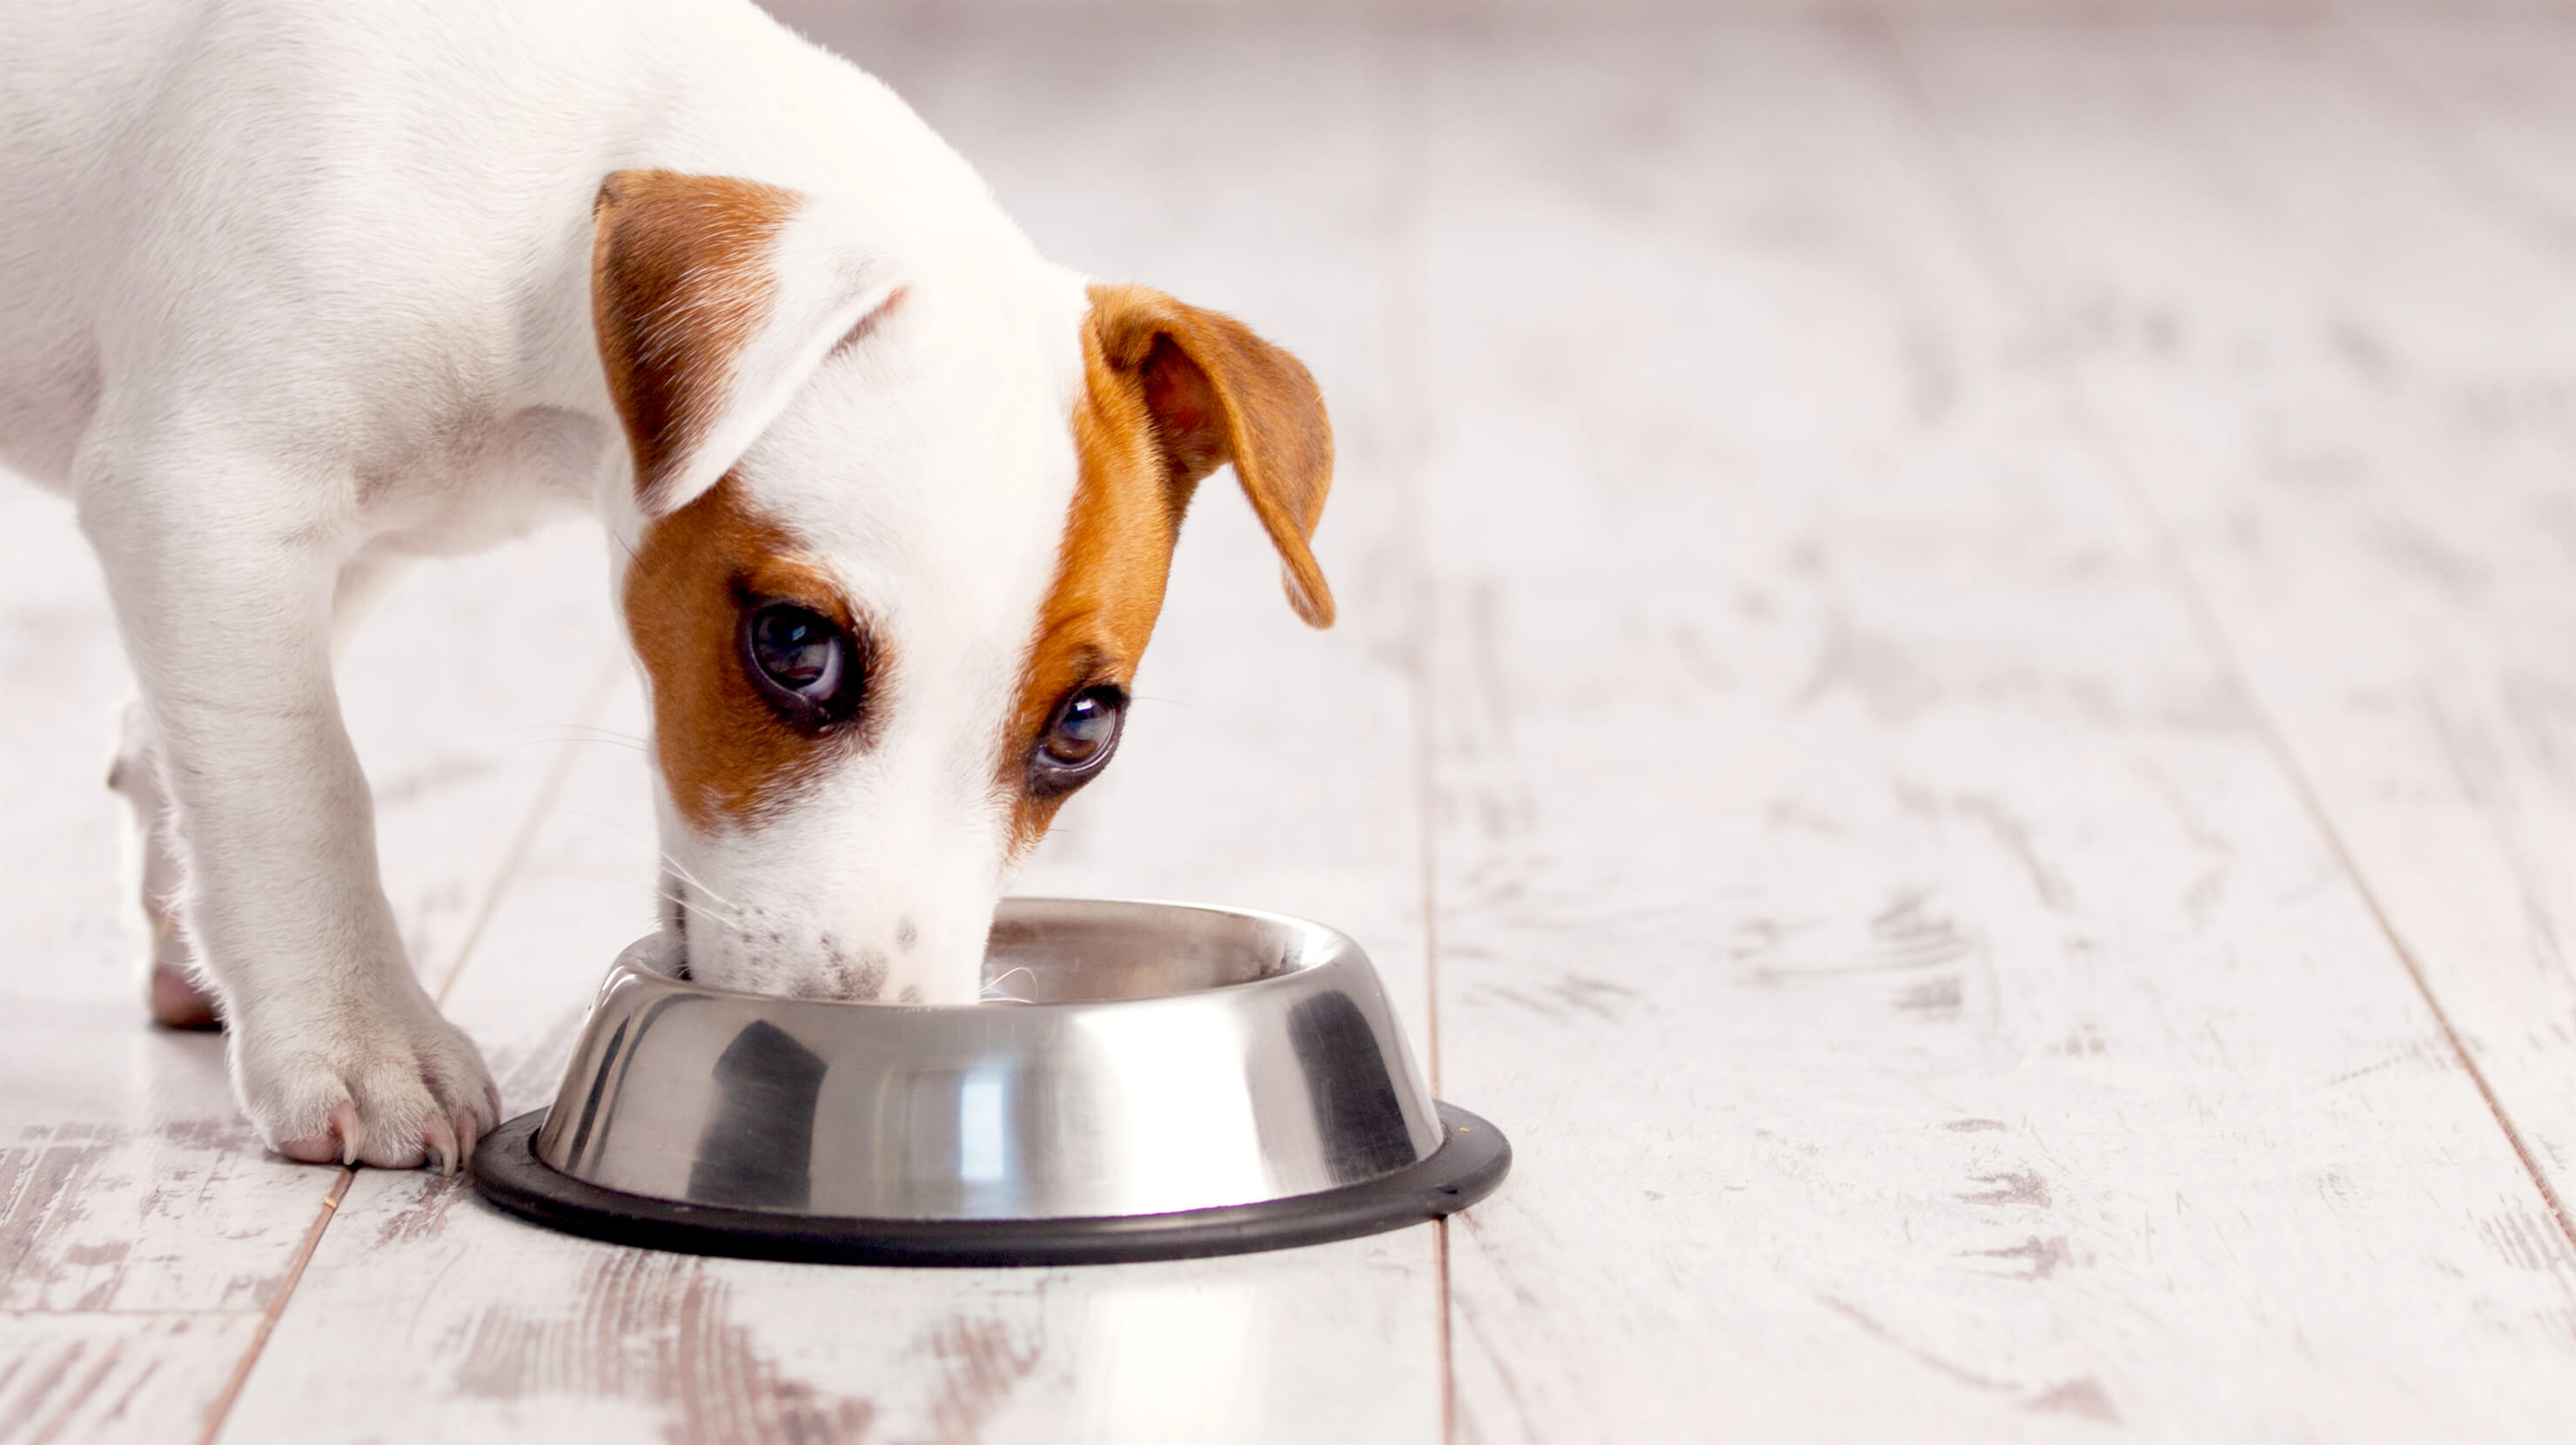 Dog Food Recall 2018: Is Your Brand on This List? - Petful